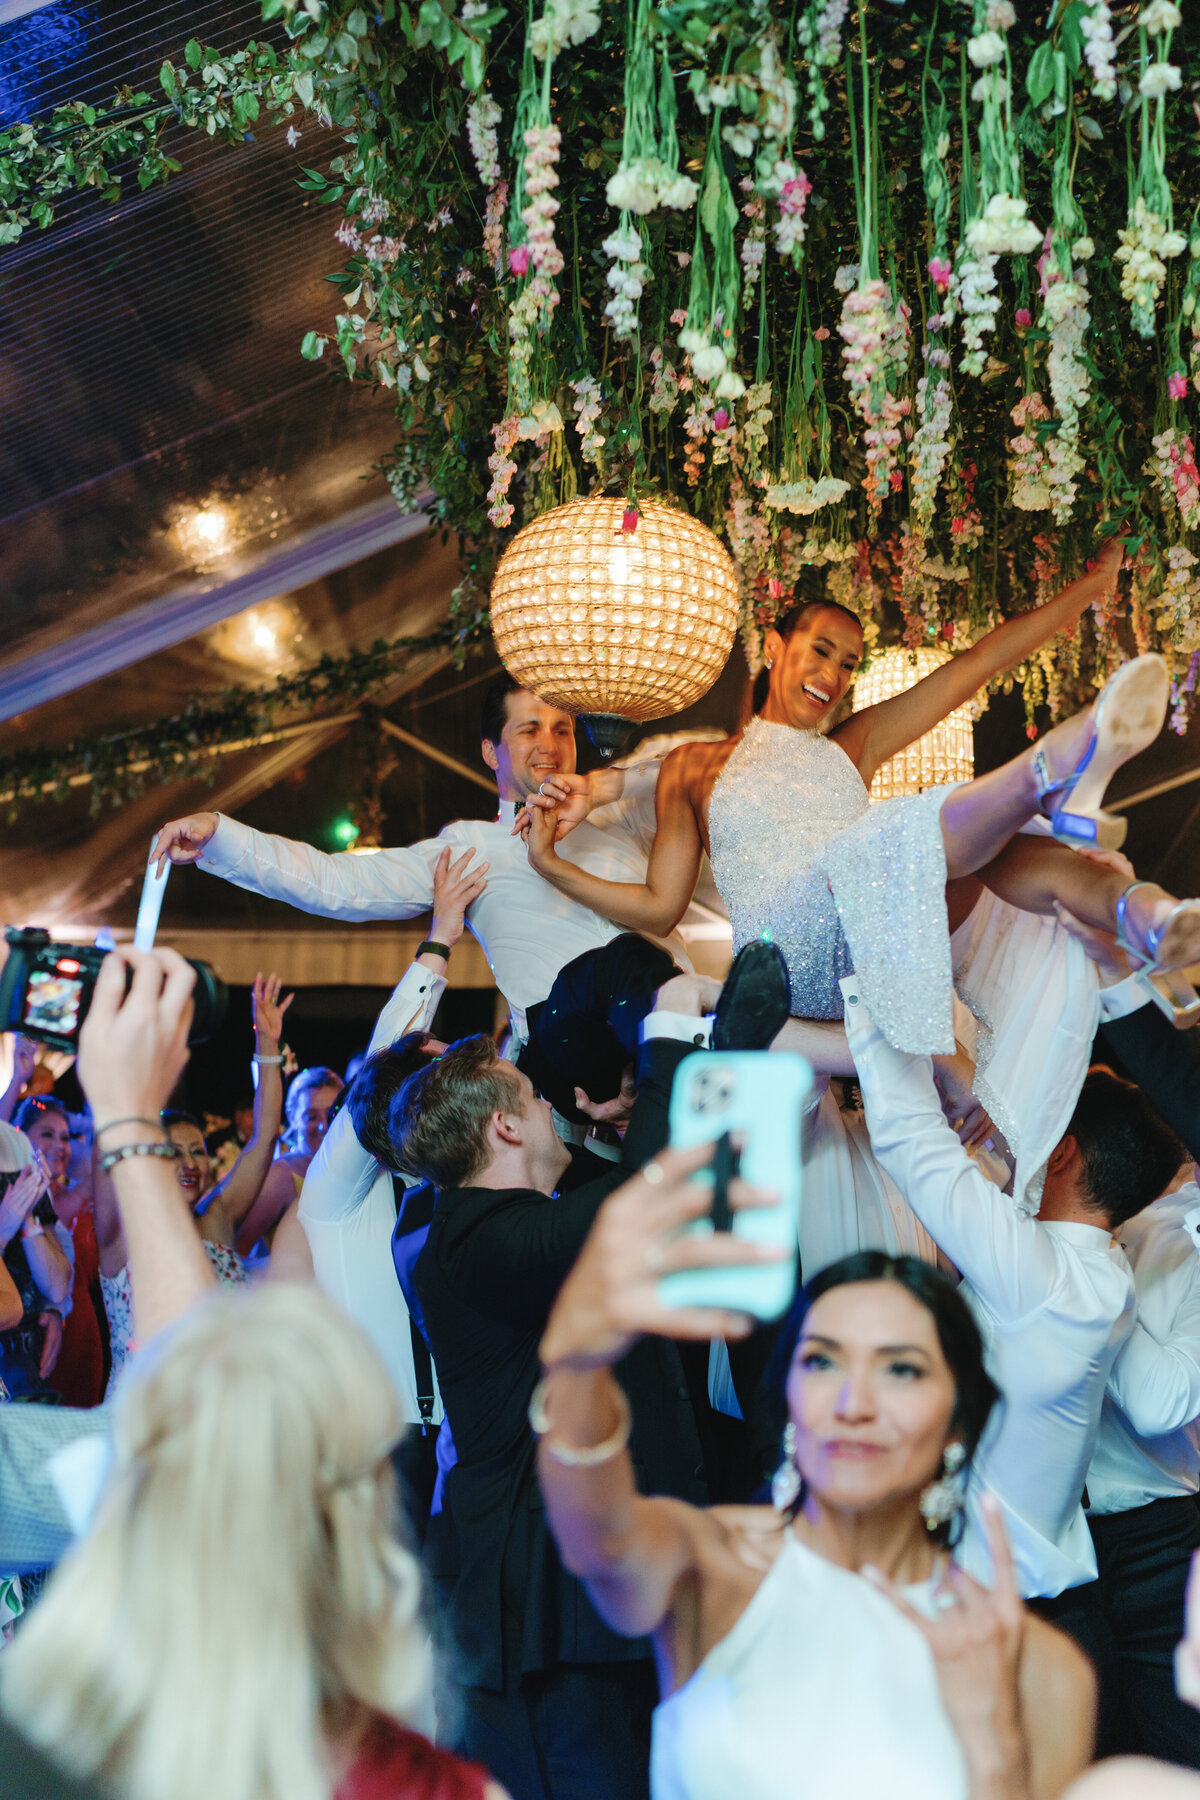 bride_groom_crowd_surfing_ceiling_flowers_party_time_reception_outfit_change_berta_dress_Wedding_kailee_dimeglio_photography-2360